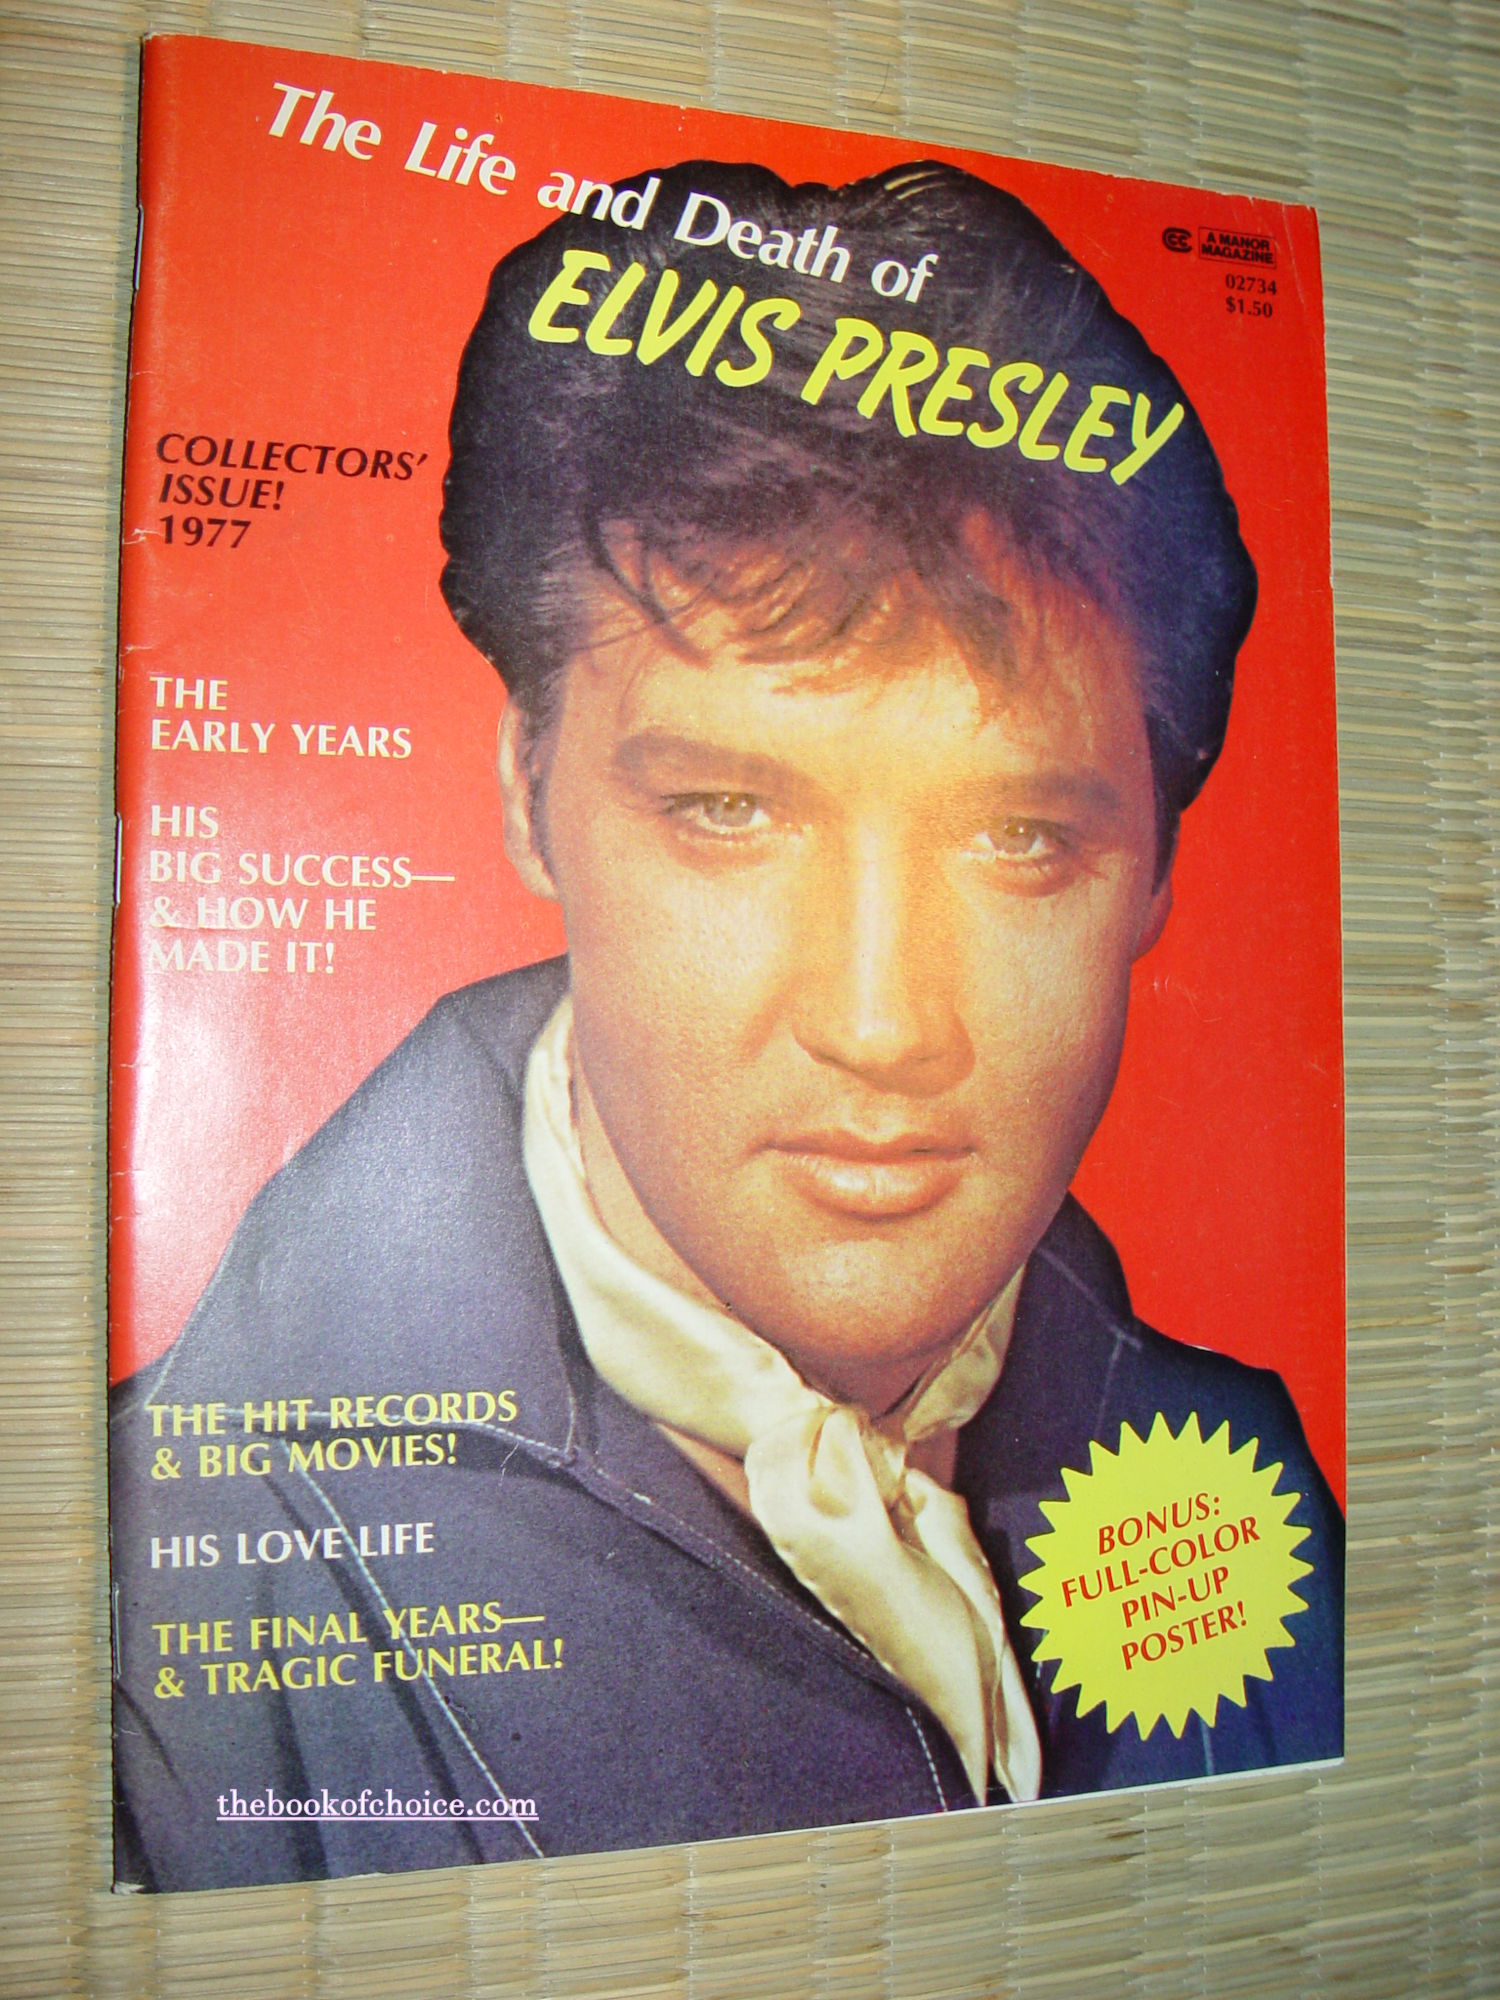 The Life and Death of Elvis Presley
                        Collectors Issue 1977 - Pin Up Poster